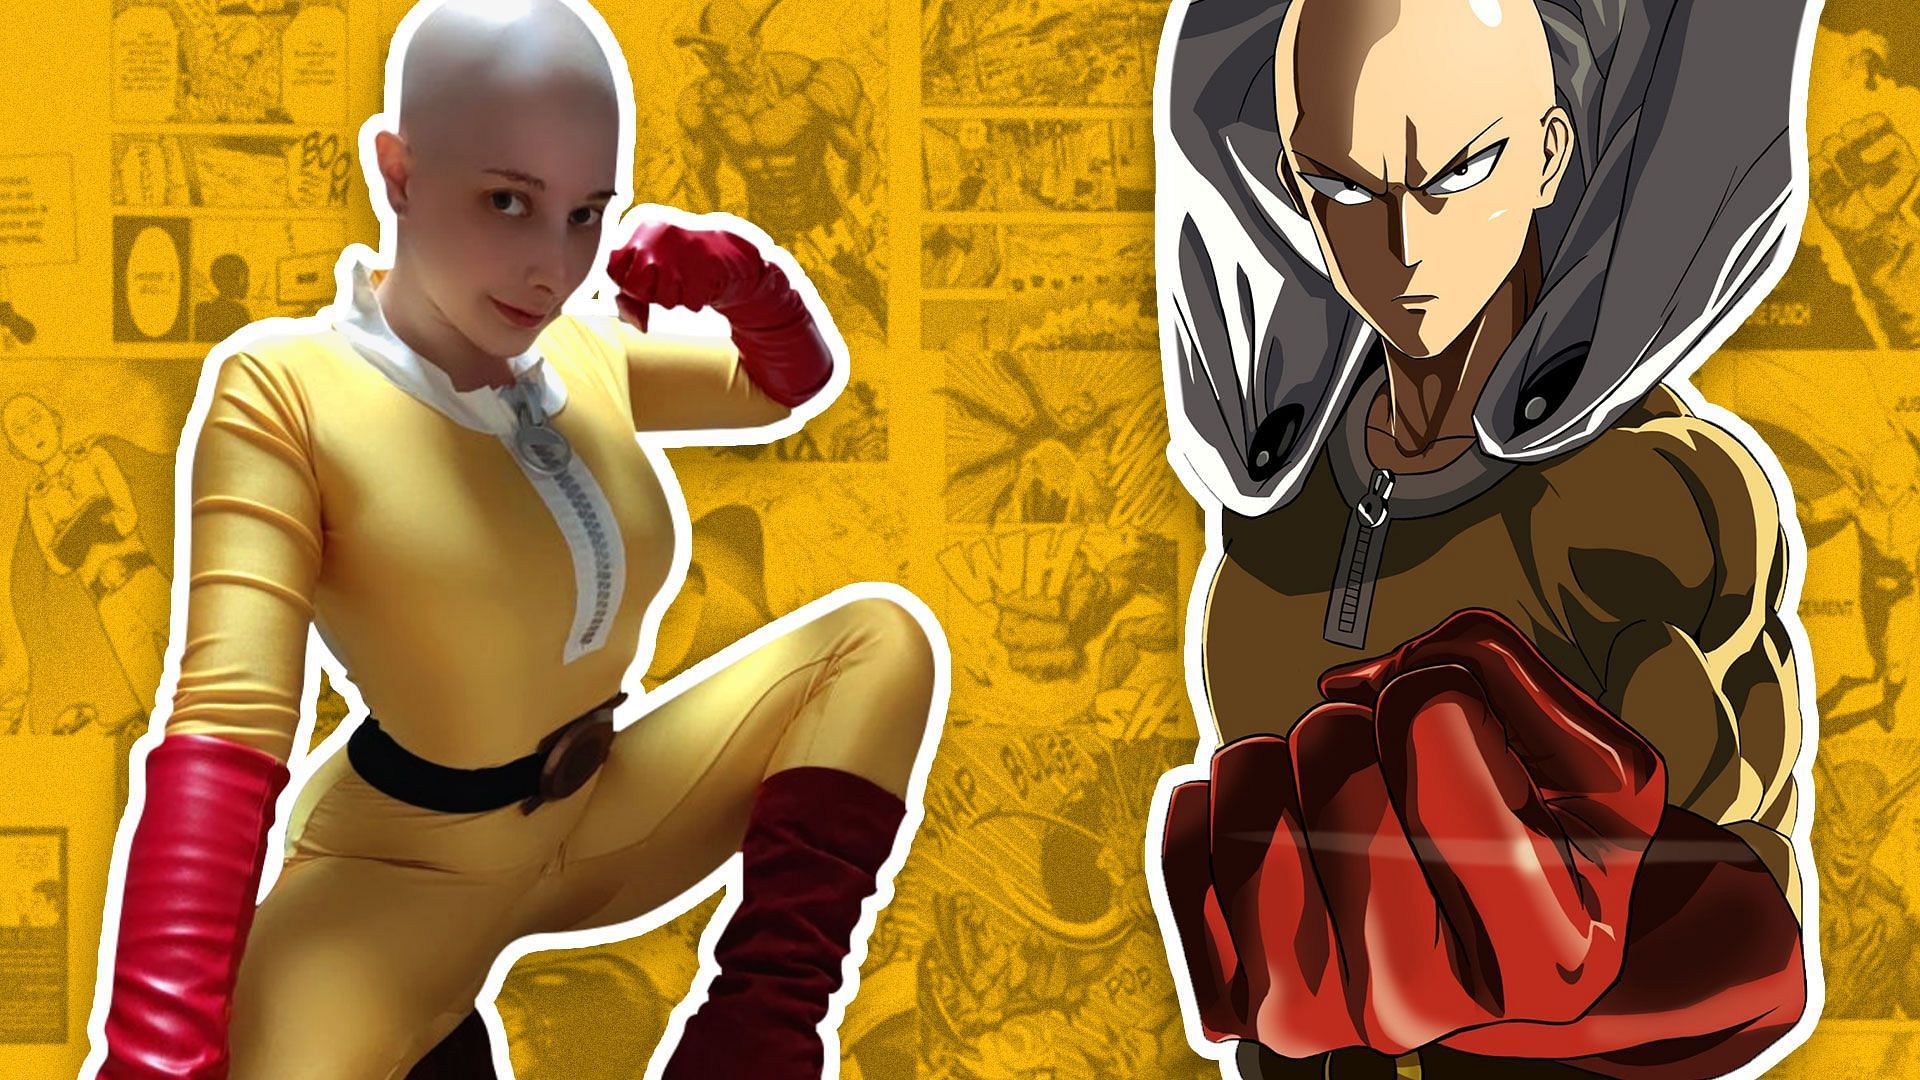 Brave One Punch Man fan suffering from cancer nails Saitama cosplay (Image via Sportskeeda)